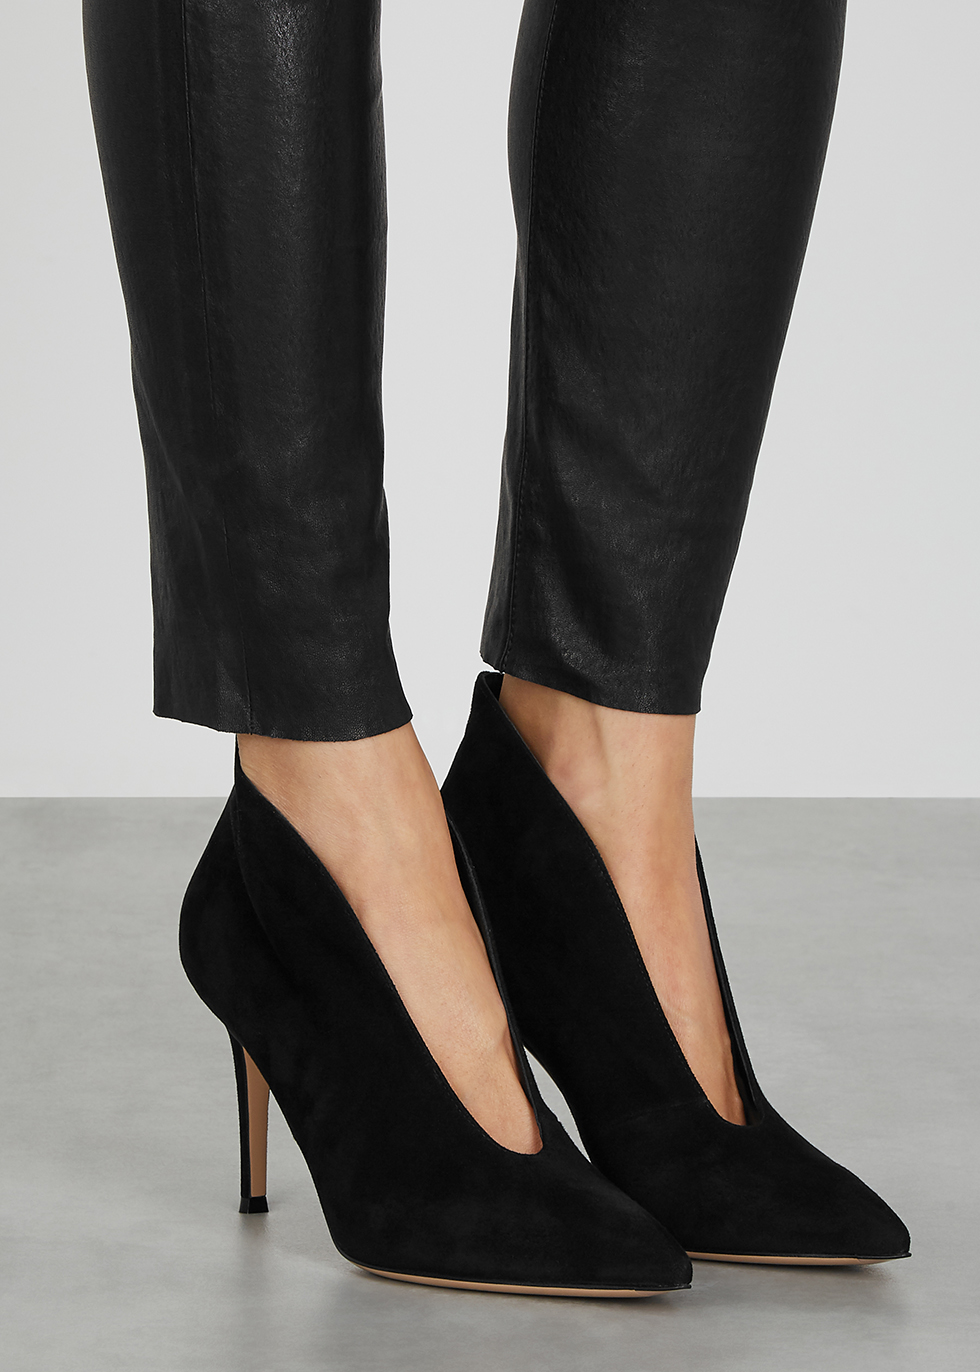 gianvito rossi suede ankle boots